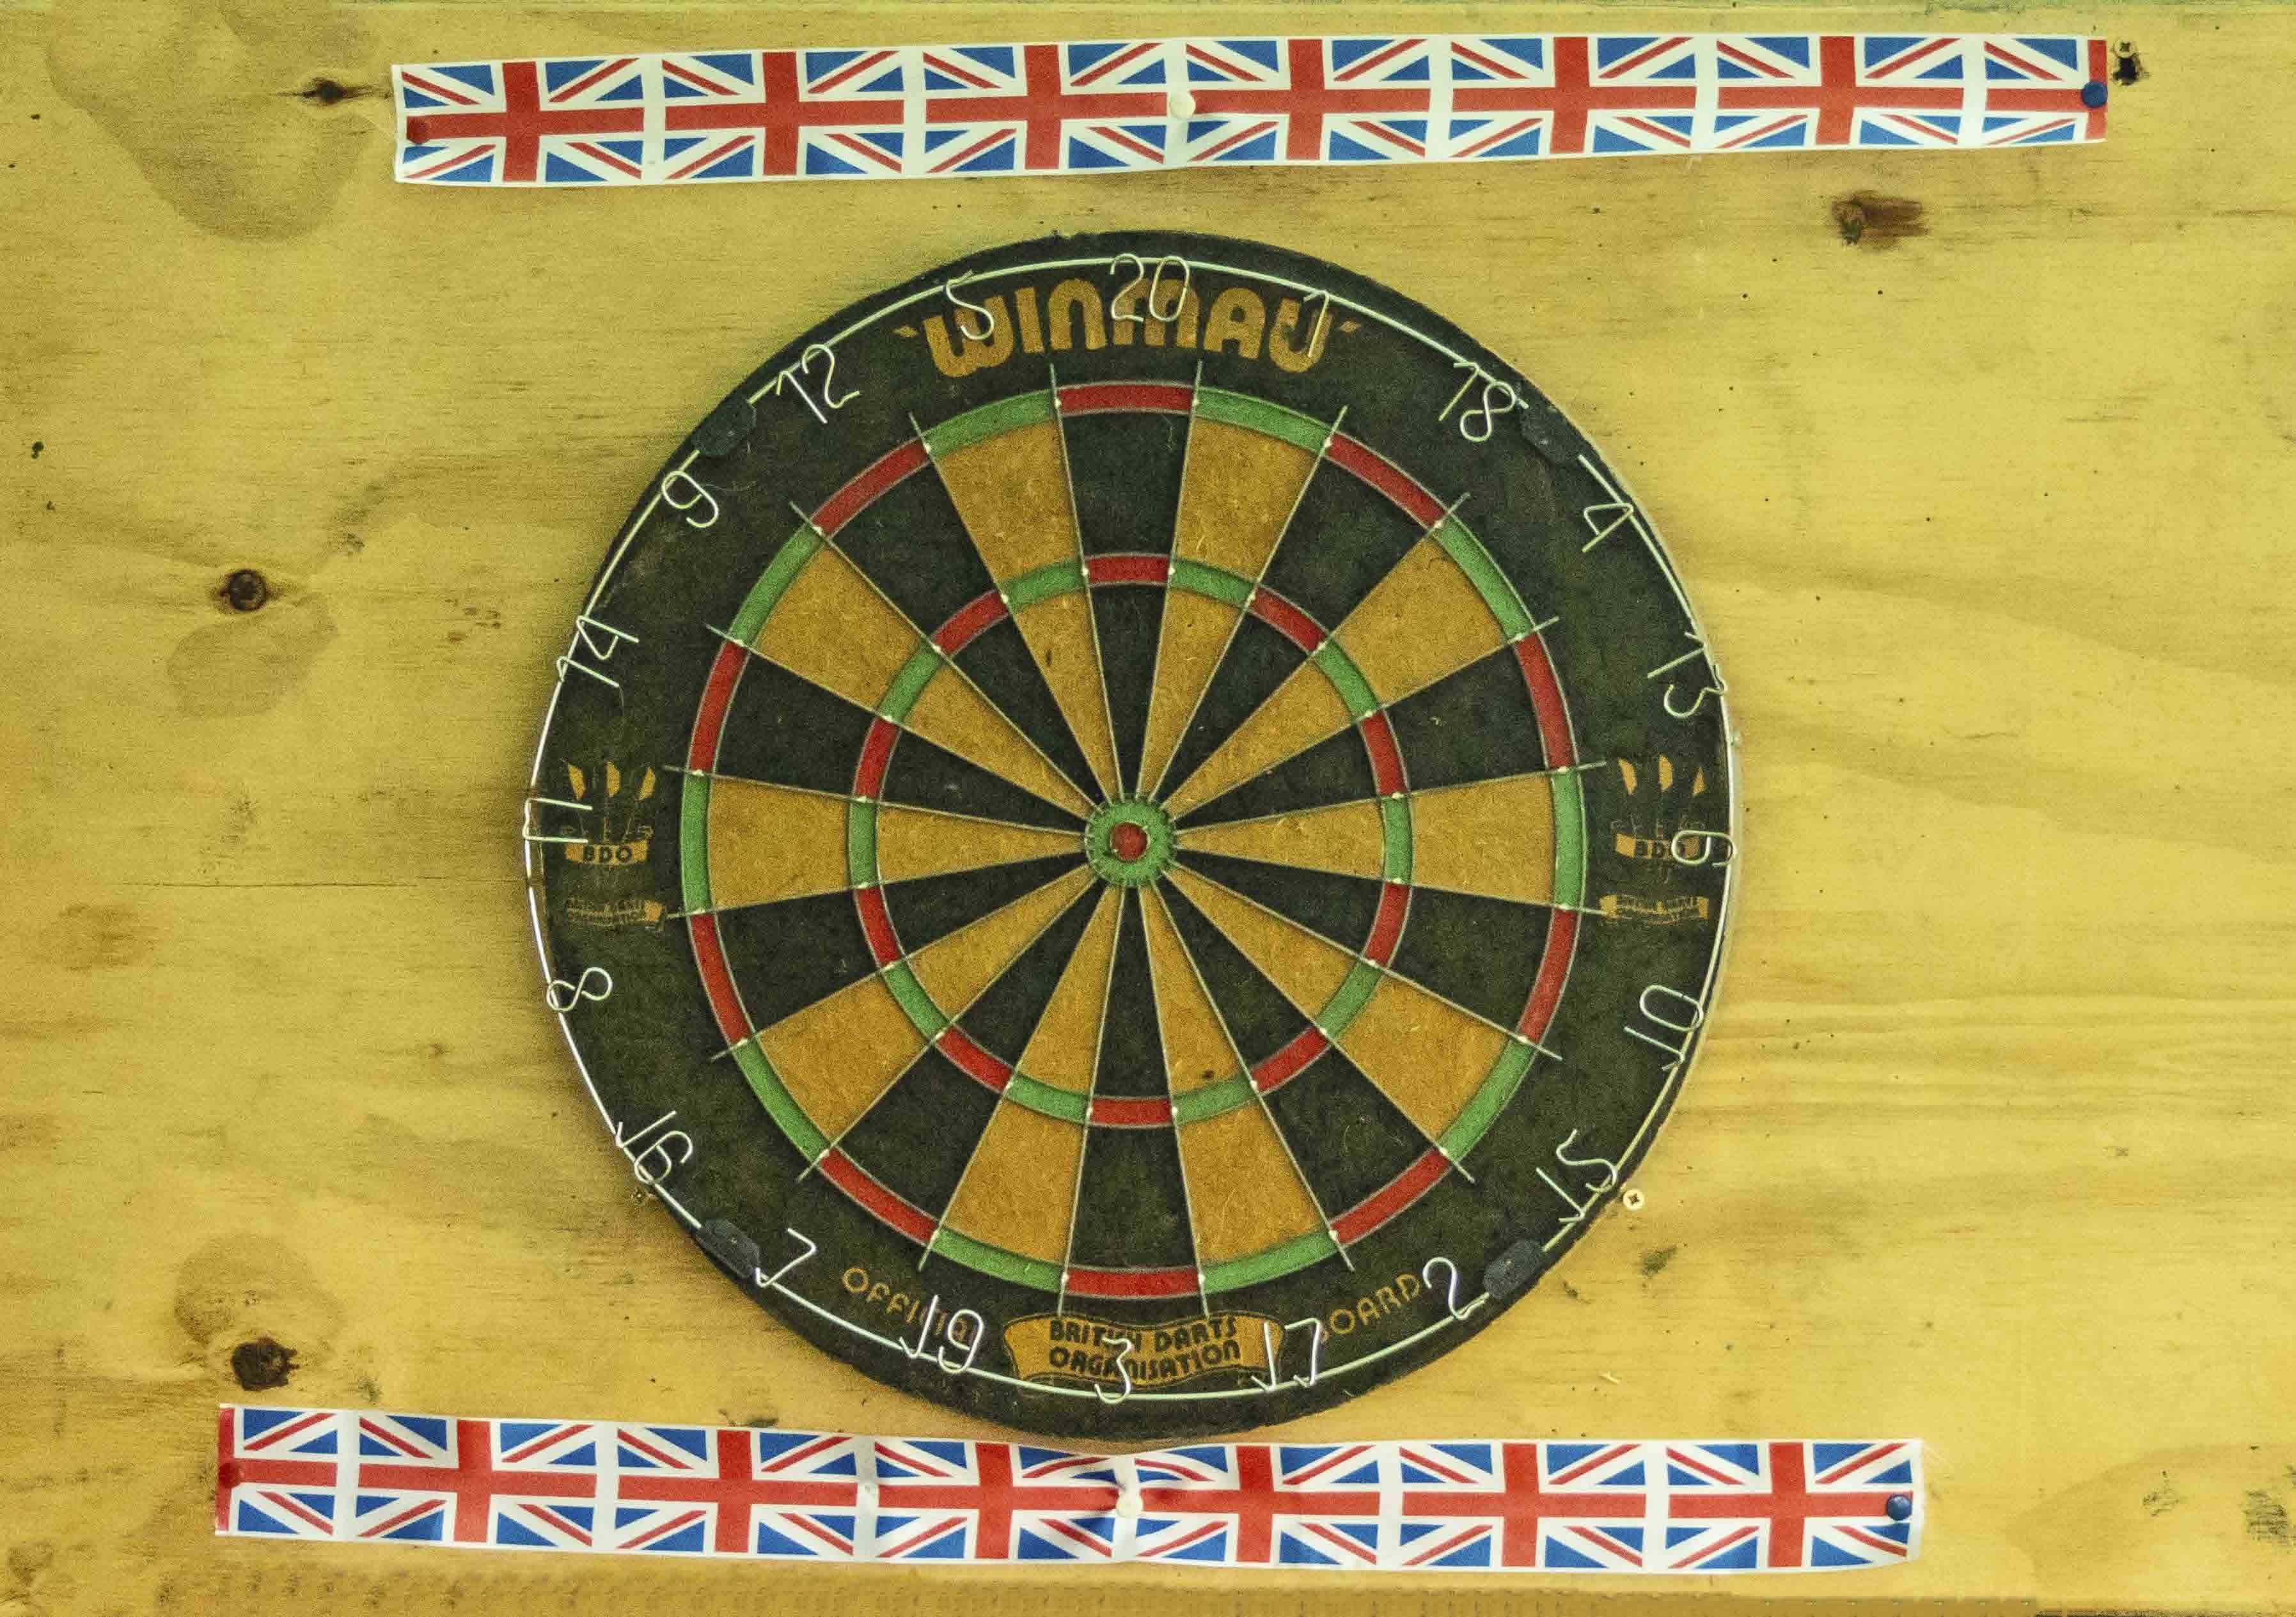 Darts Competition